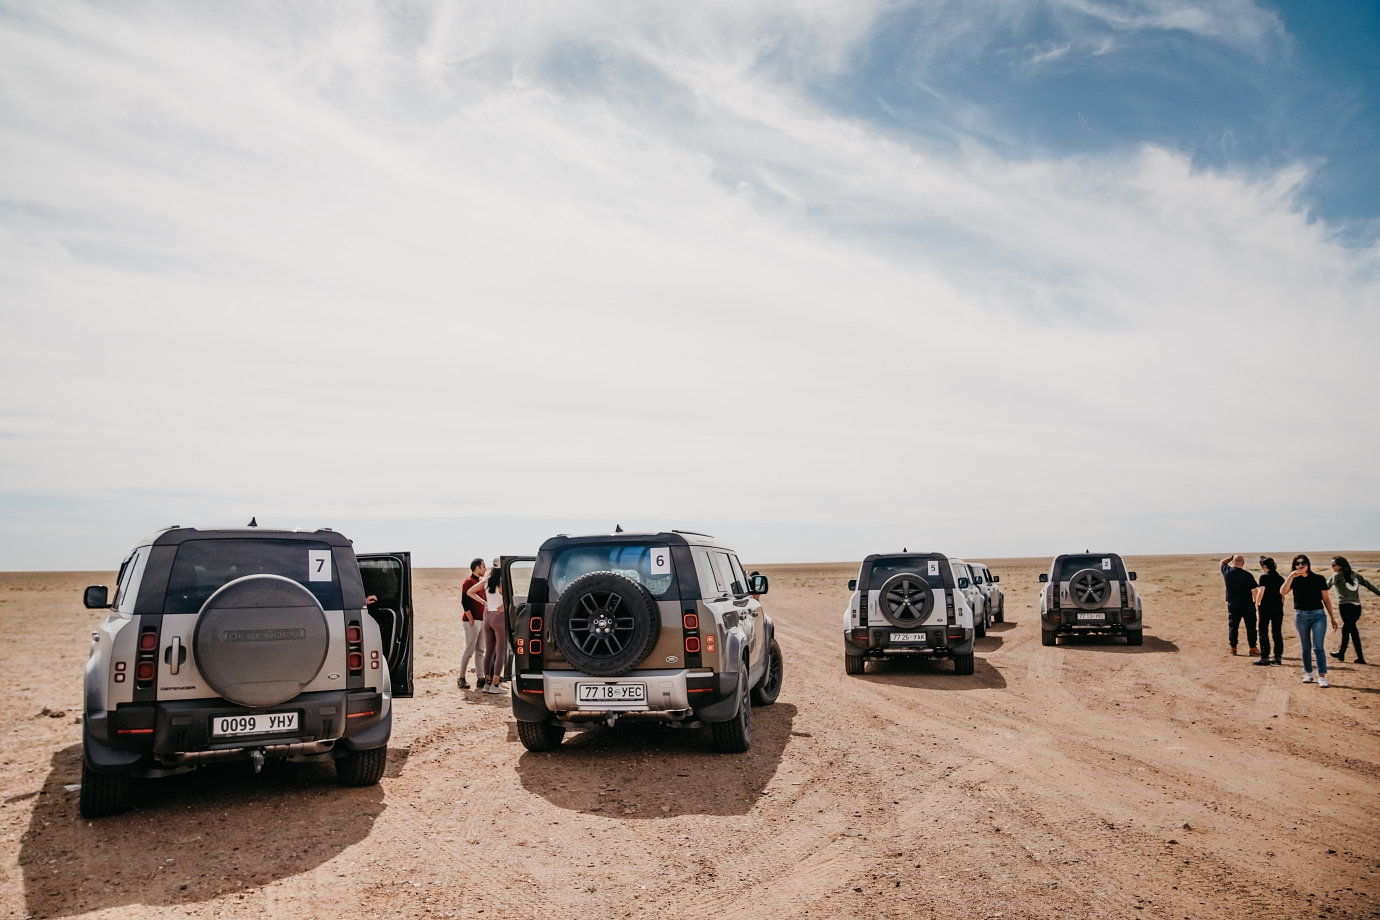 wearnes starchase, jlr, new defender, land rover, landrover, range rover, land rover, landrover, range rover, defender, land rover defender, wearnes automotive, jlr, landrover defender, jaguar land rover, wearnes starchase mongolia land rover defender experience : all roads lead to roam